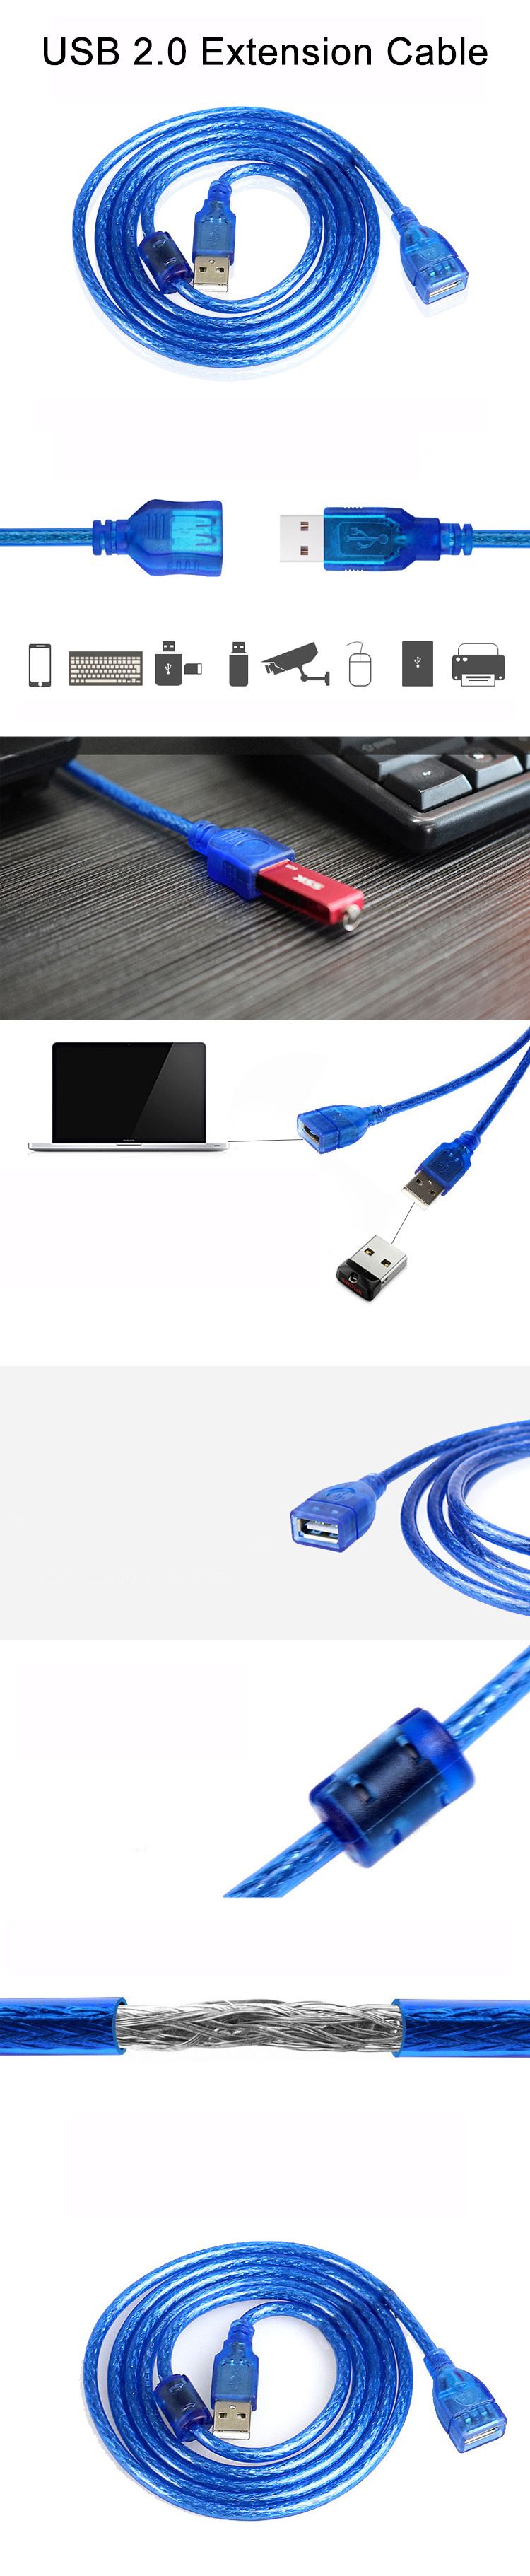 BAYNAST-USB-to-USB-Extension-Cable-Male-to-Female-USB20-Cable-Cord-For-Computer-USB-Port-Cable-Exten-1659690